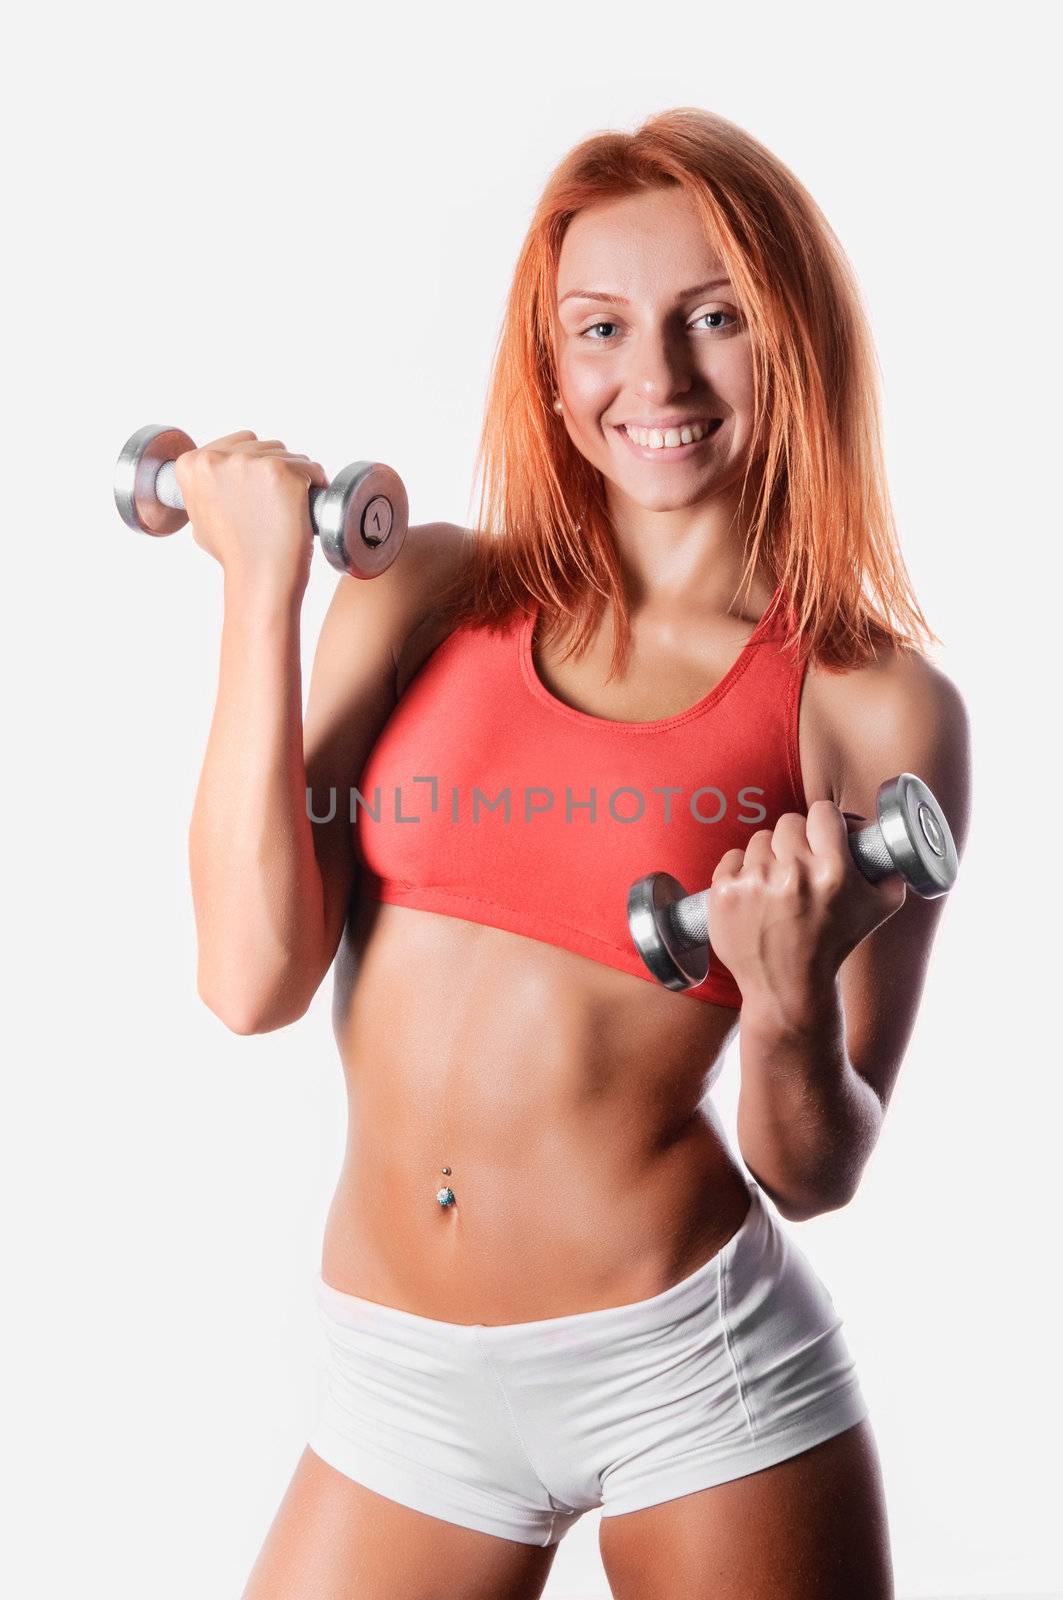 The young coach is engaged in bodybuilding dumbbell
